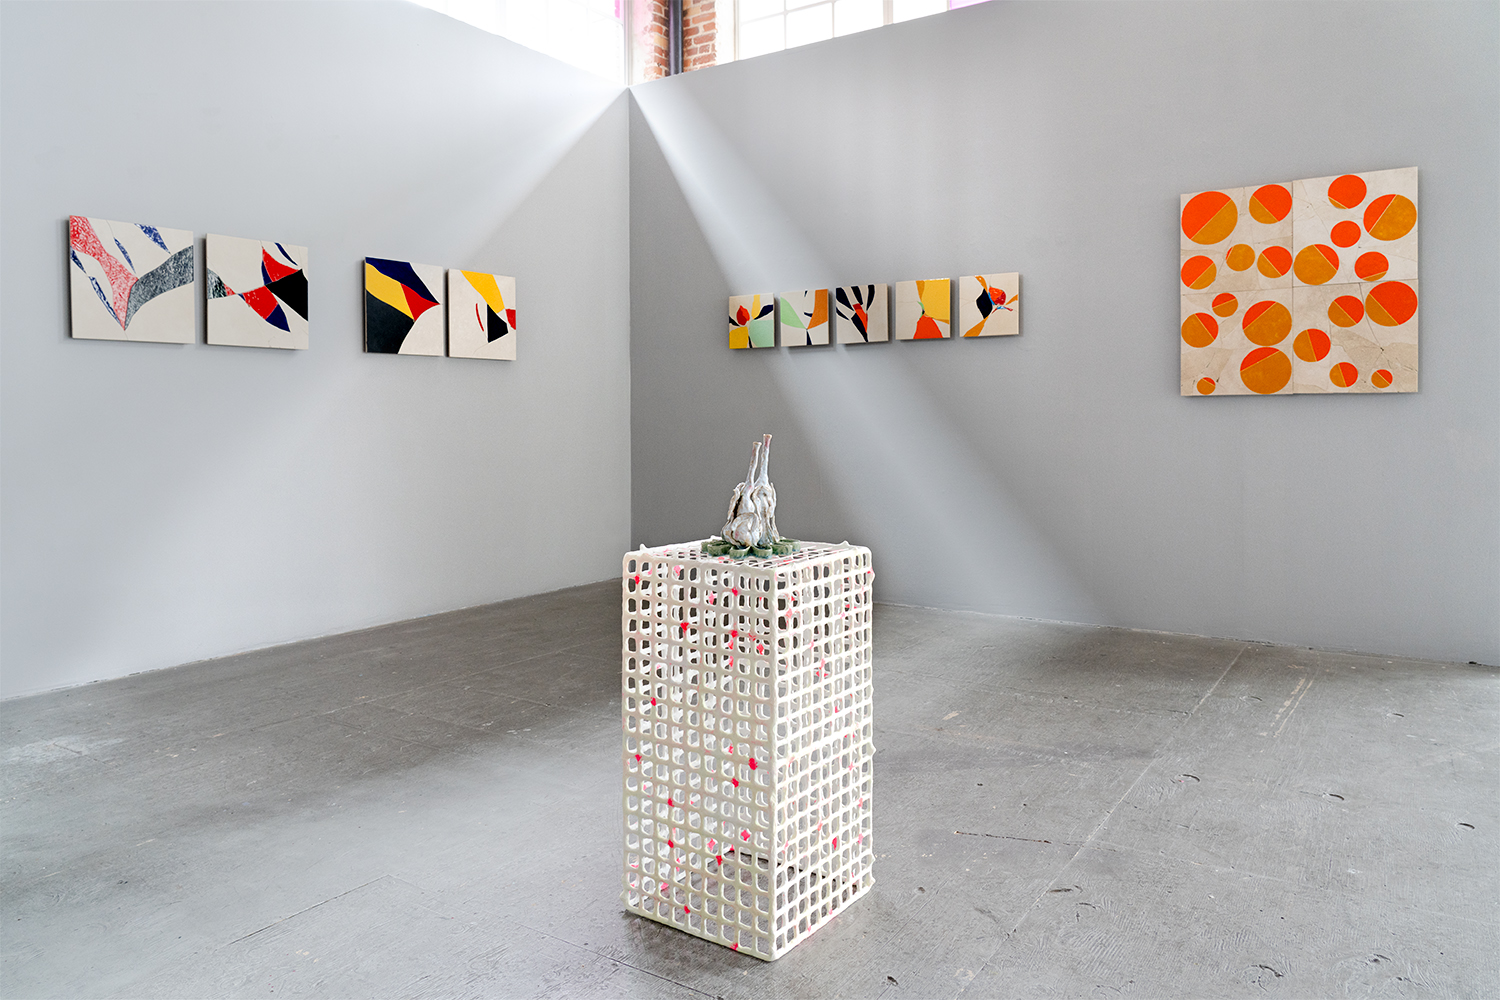 Fractured and multicolored tile pieces on light gray walls, in foreground a sculpture made of white gridded material with a ceramic piece on top